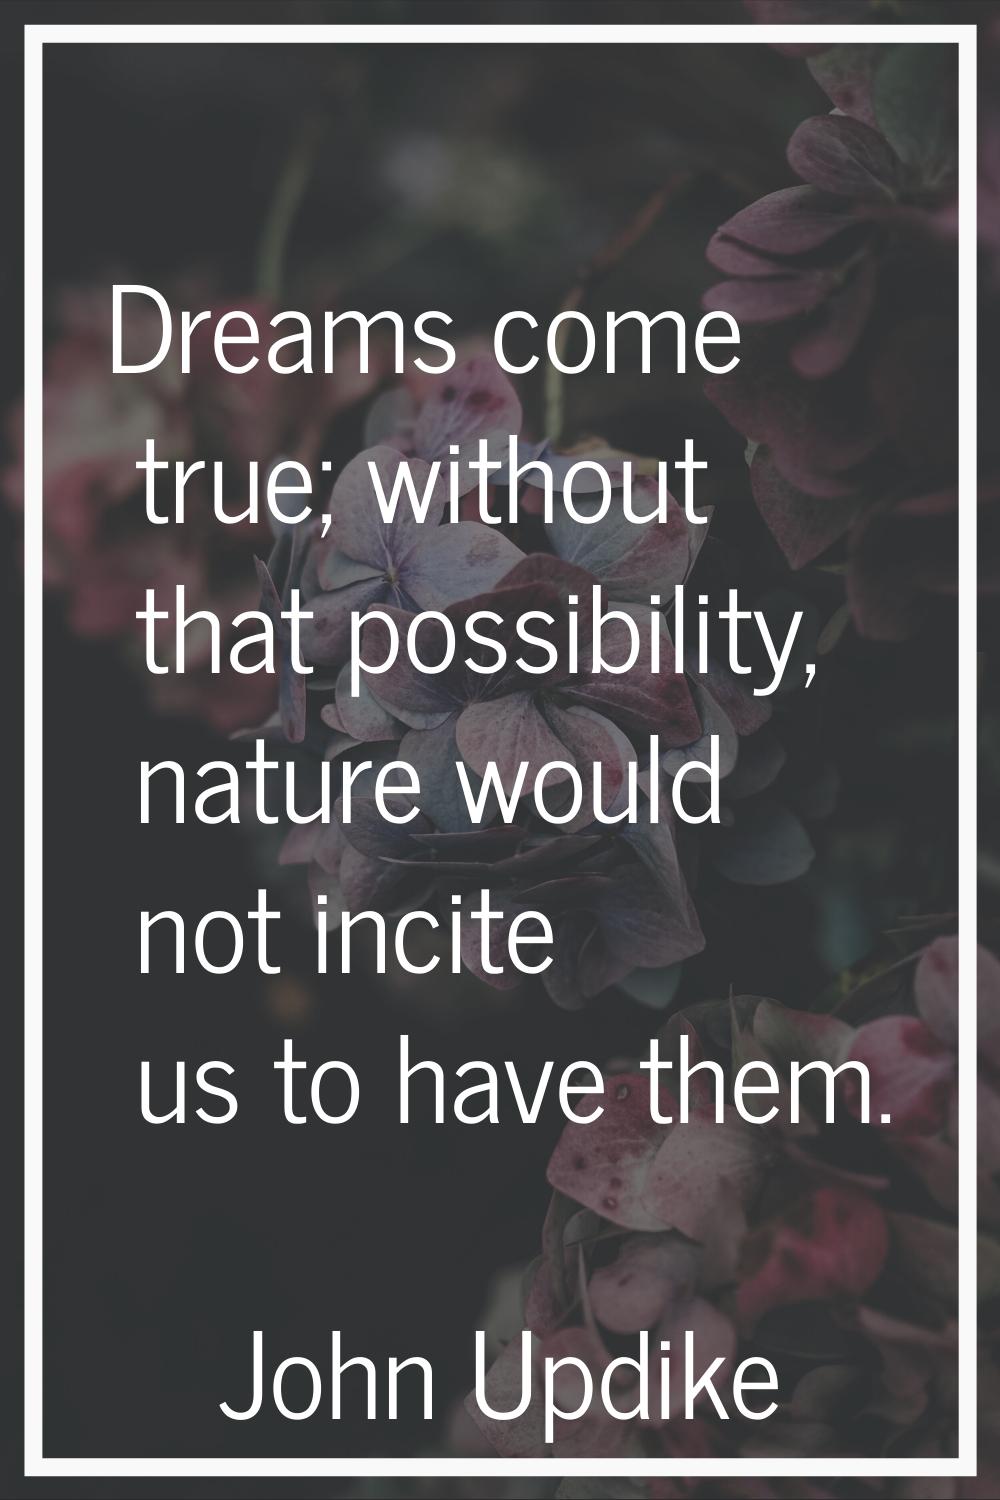 Dreams come true; without that possibility, nature would not incite us to have them.